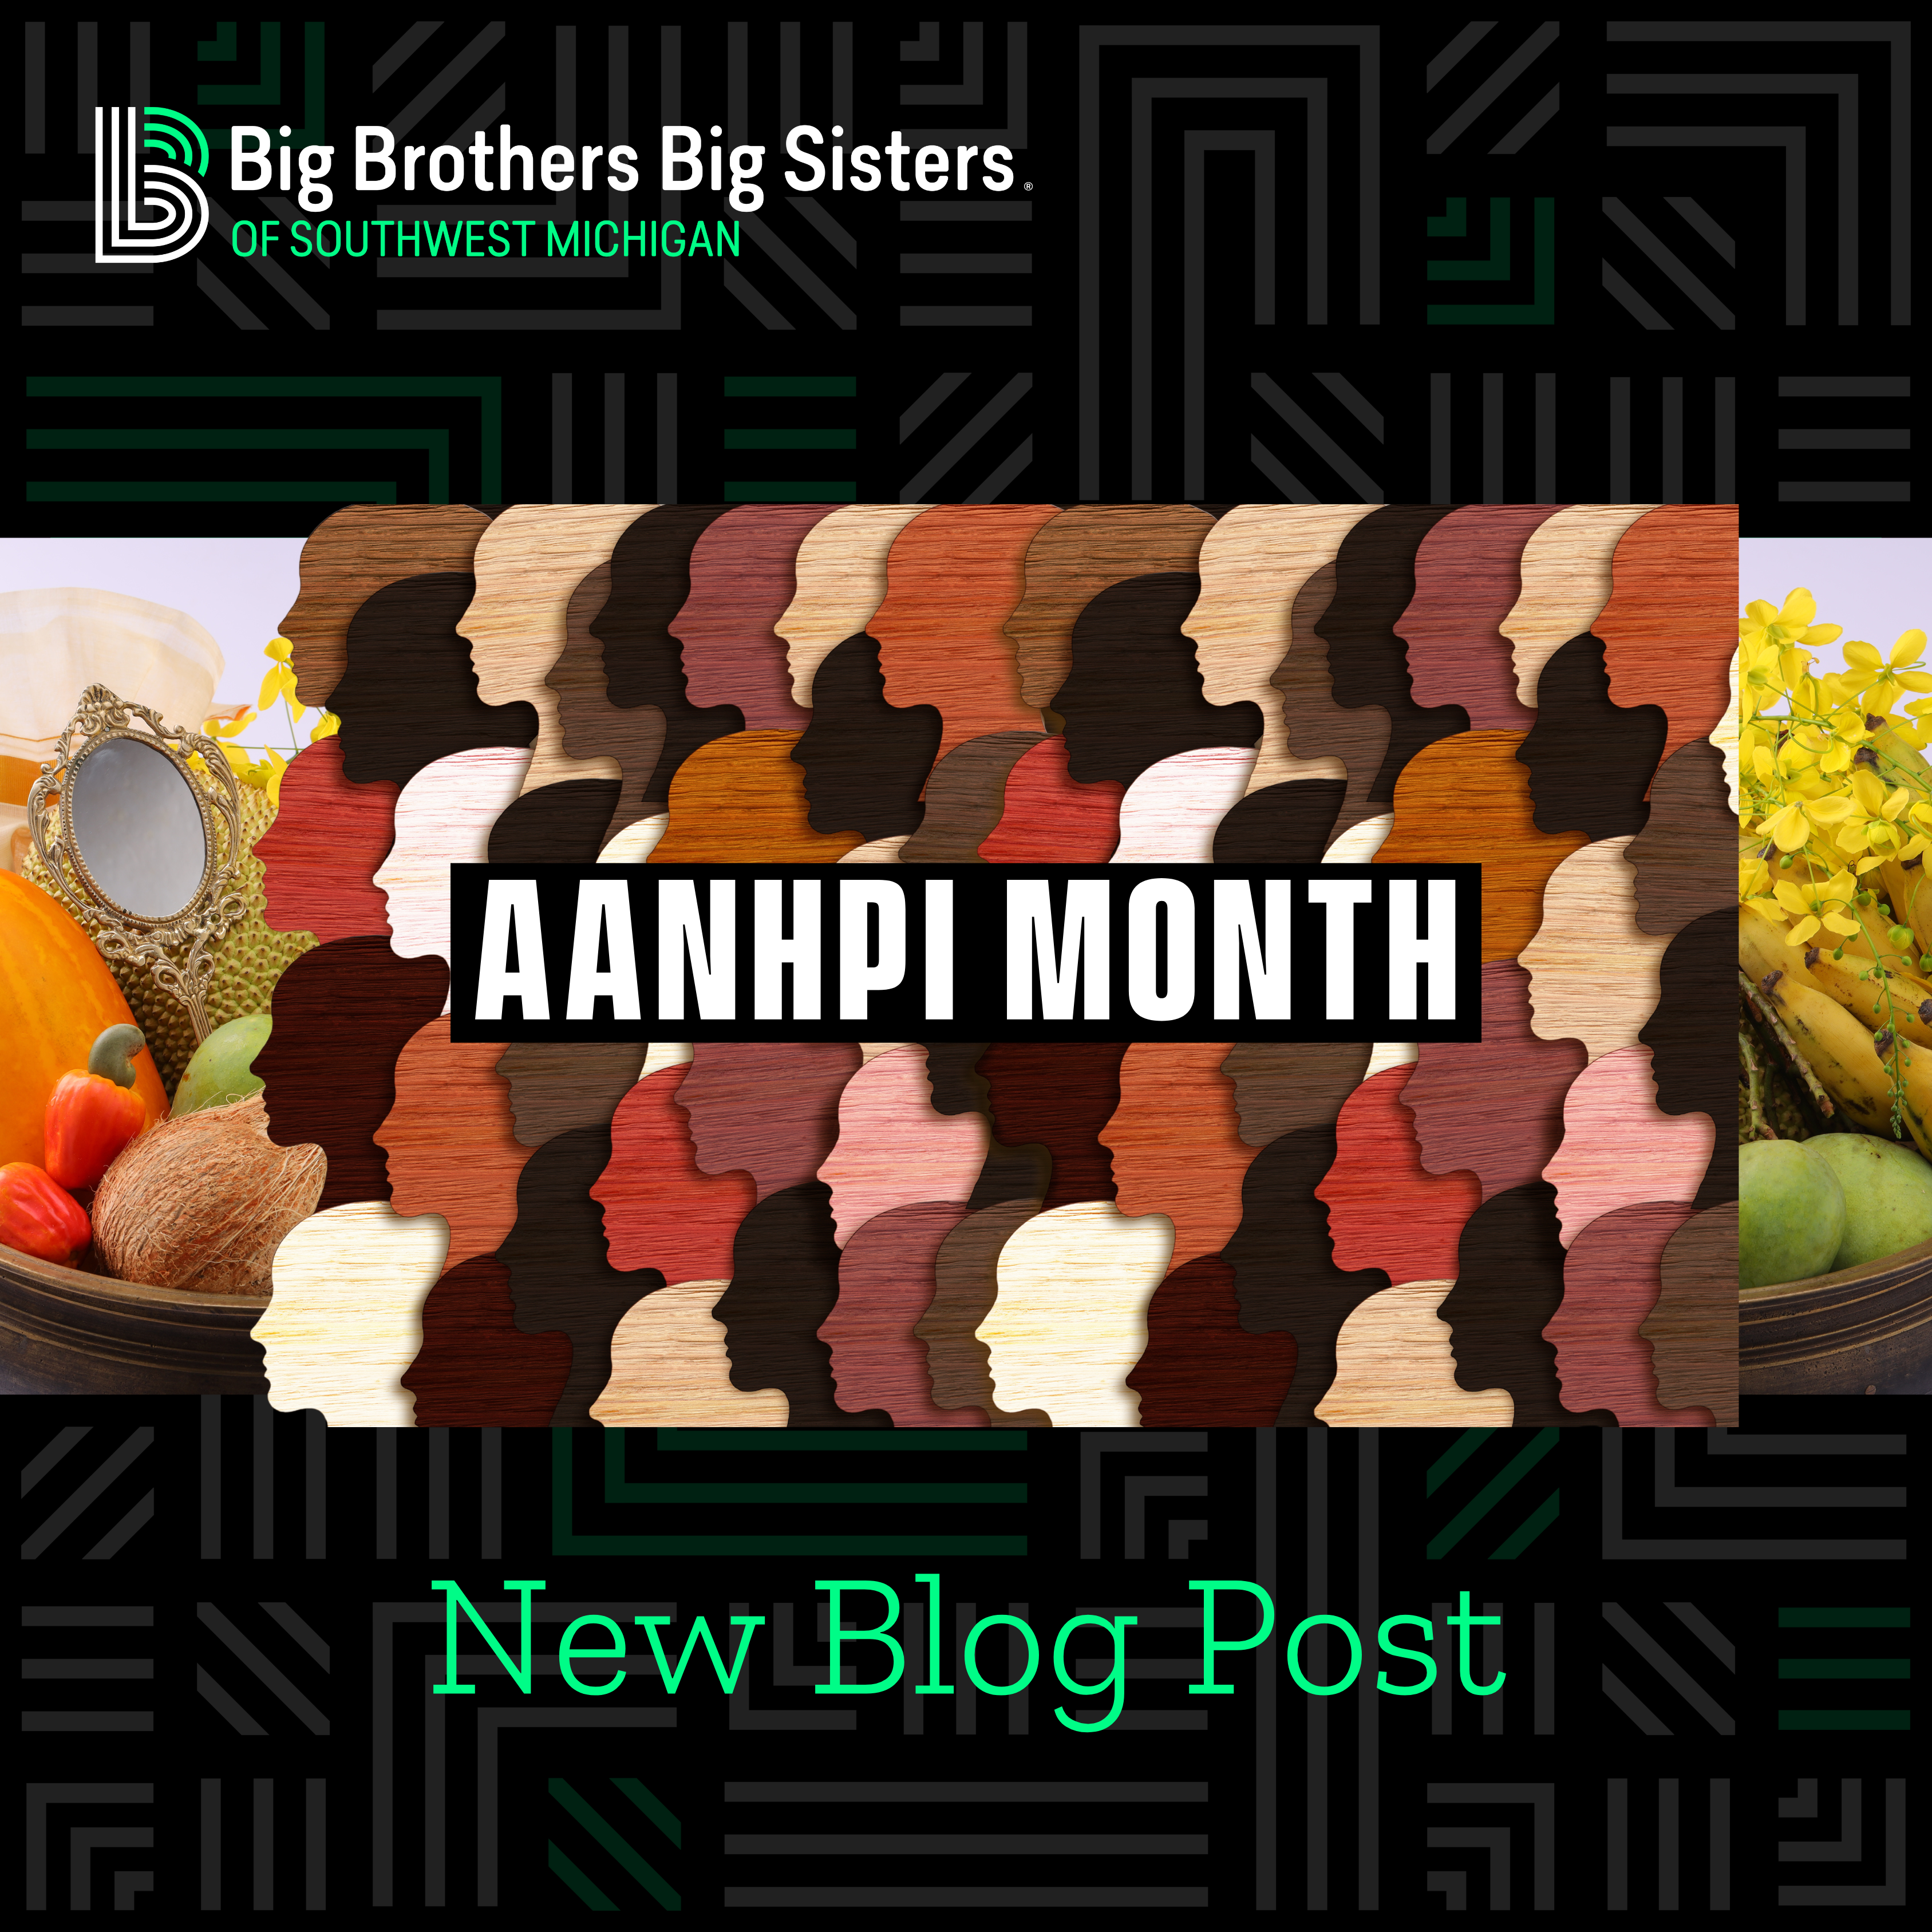 Image of multiple skin colors in a group with the words "AANHPI month" across the middle, and fruits and vegetables and flowers in a bowl on each side and the BBBS logo on the bottom